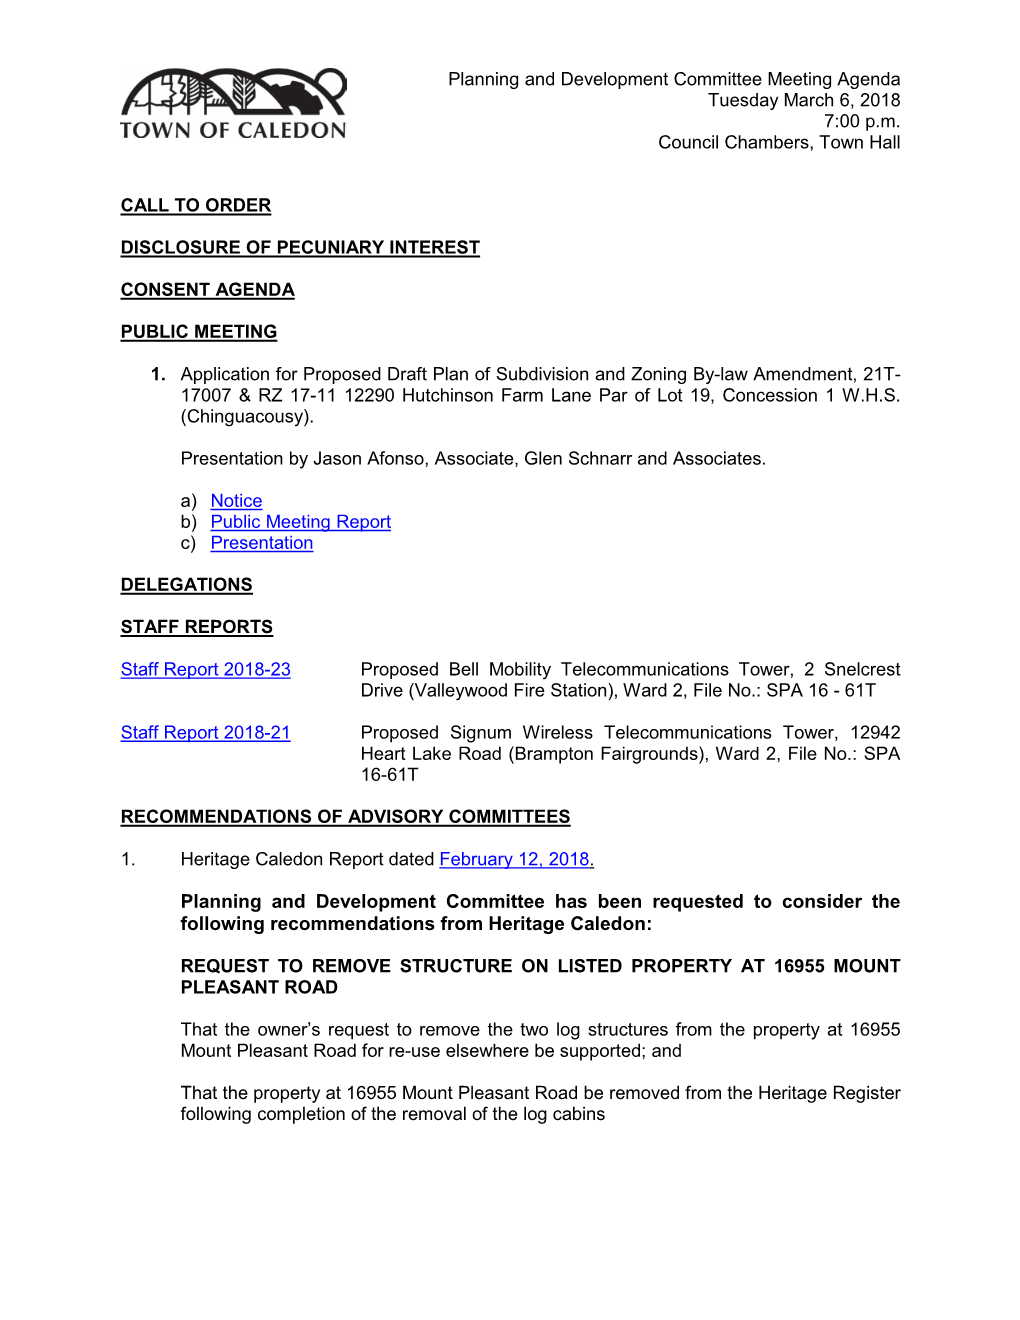 March 6, 2018 Planning and Development Committee Agenda Package